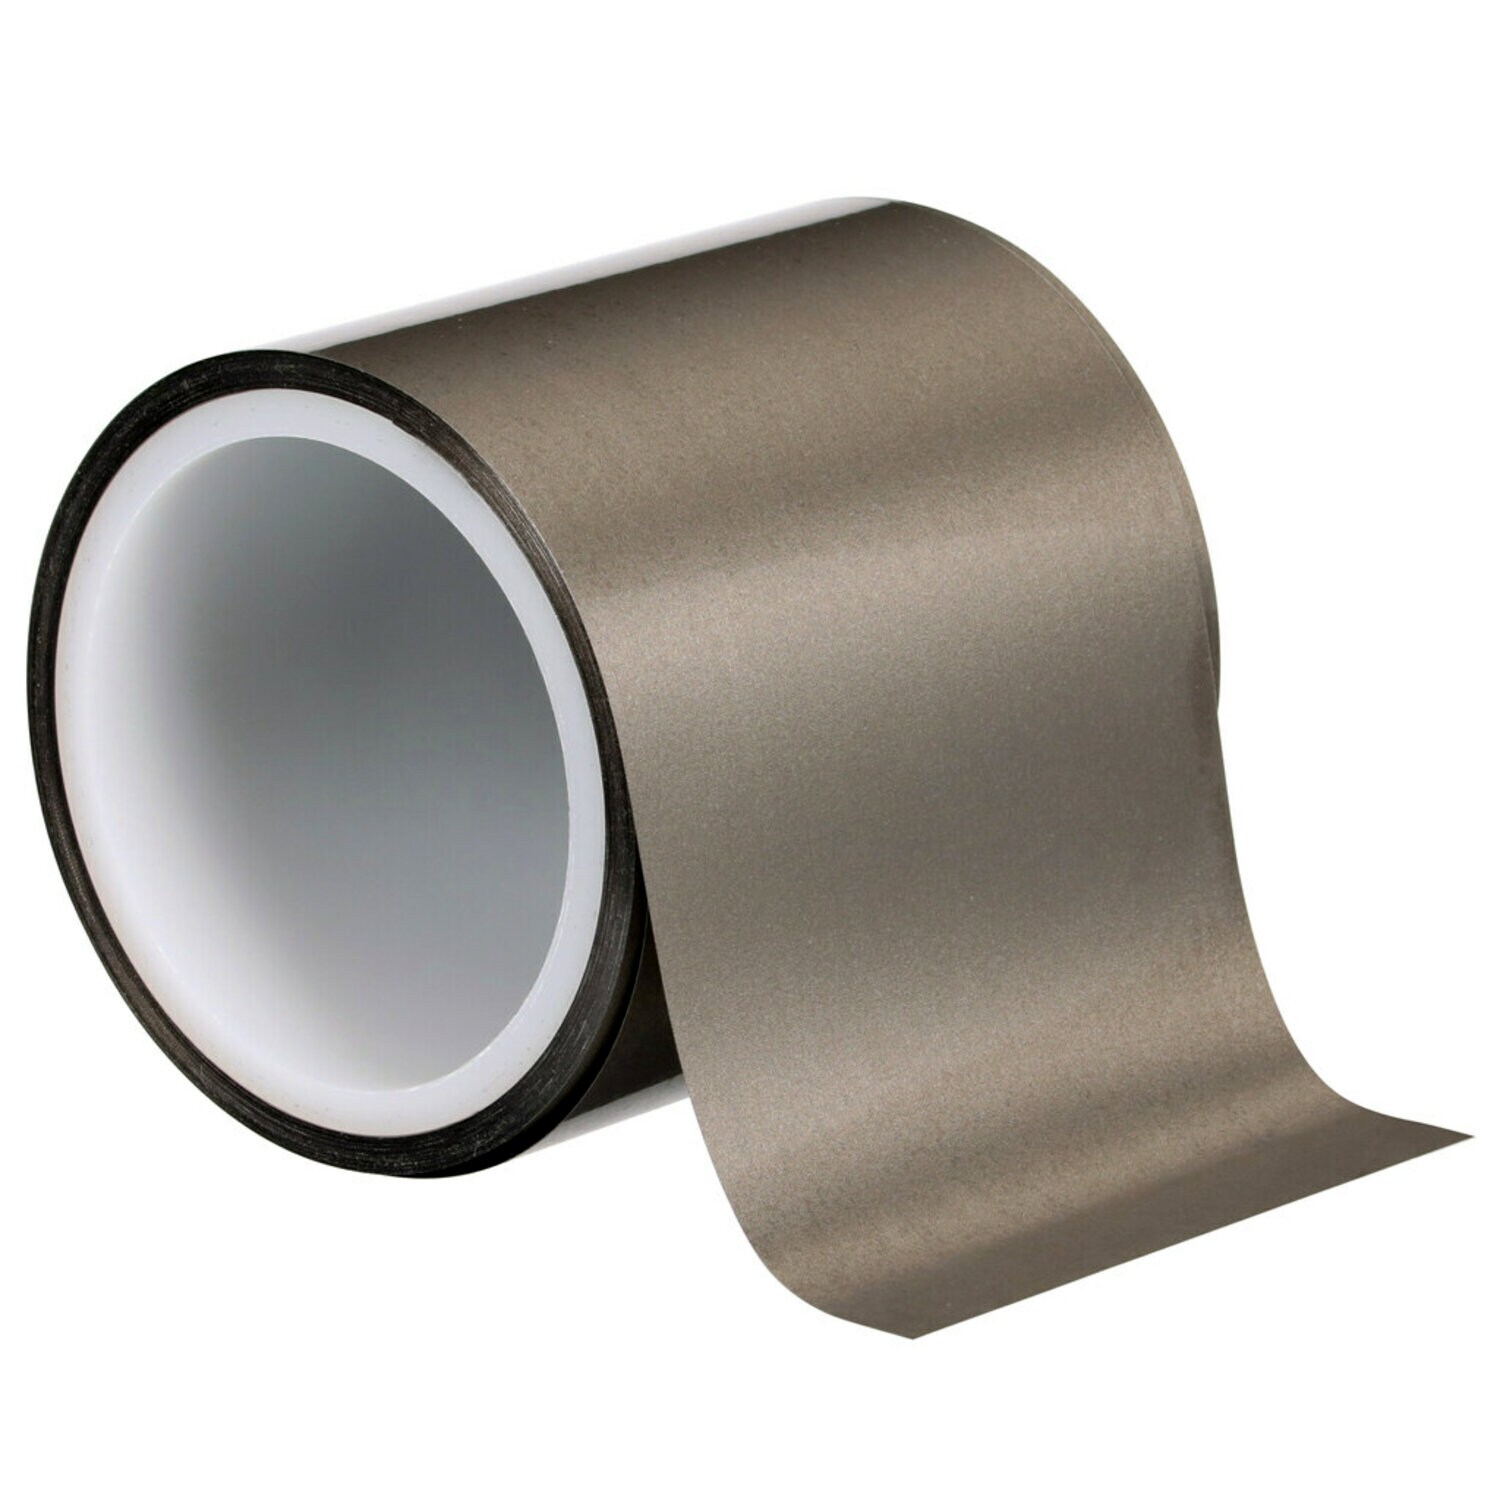 7100313612 - 3M Electrically Conductive Single-Sided Tape 5113SFT-50, Grey, 50 mm x 30 m, 8 Rolls/Case